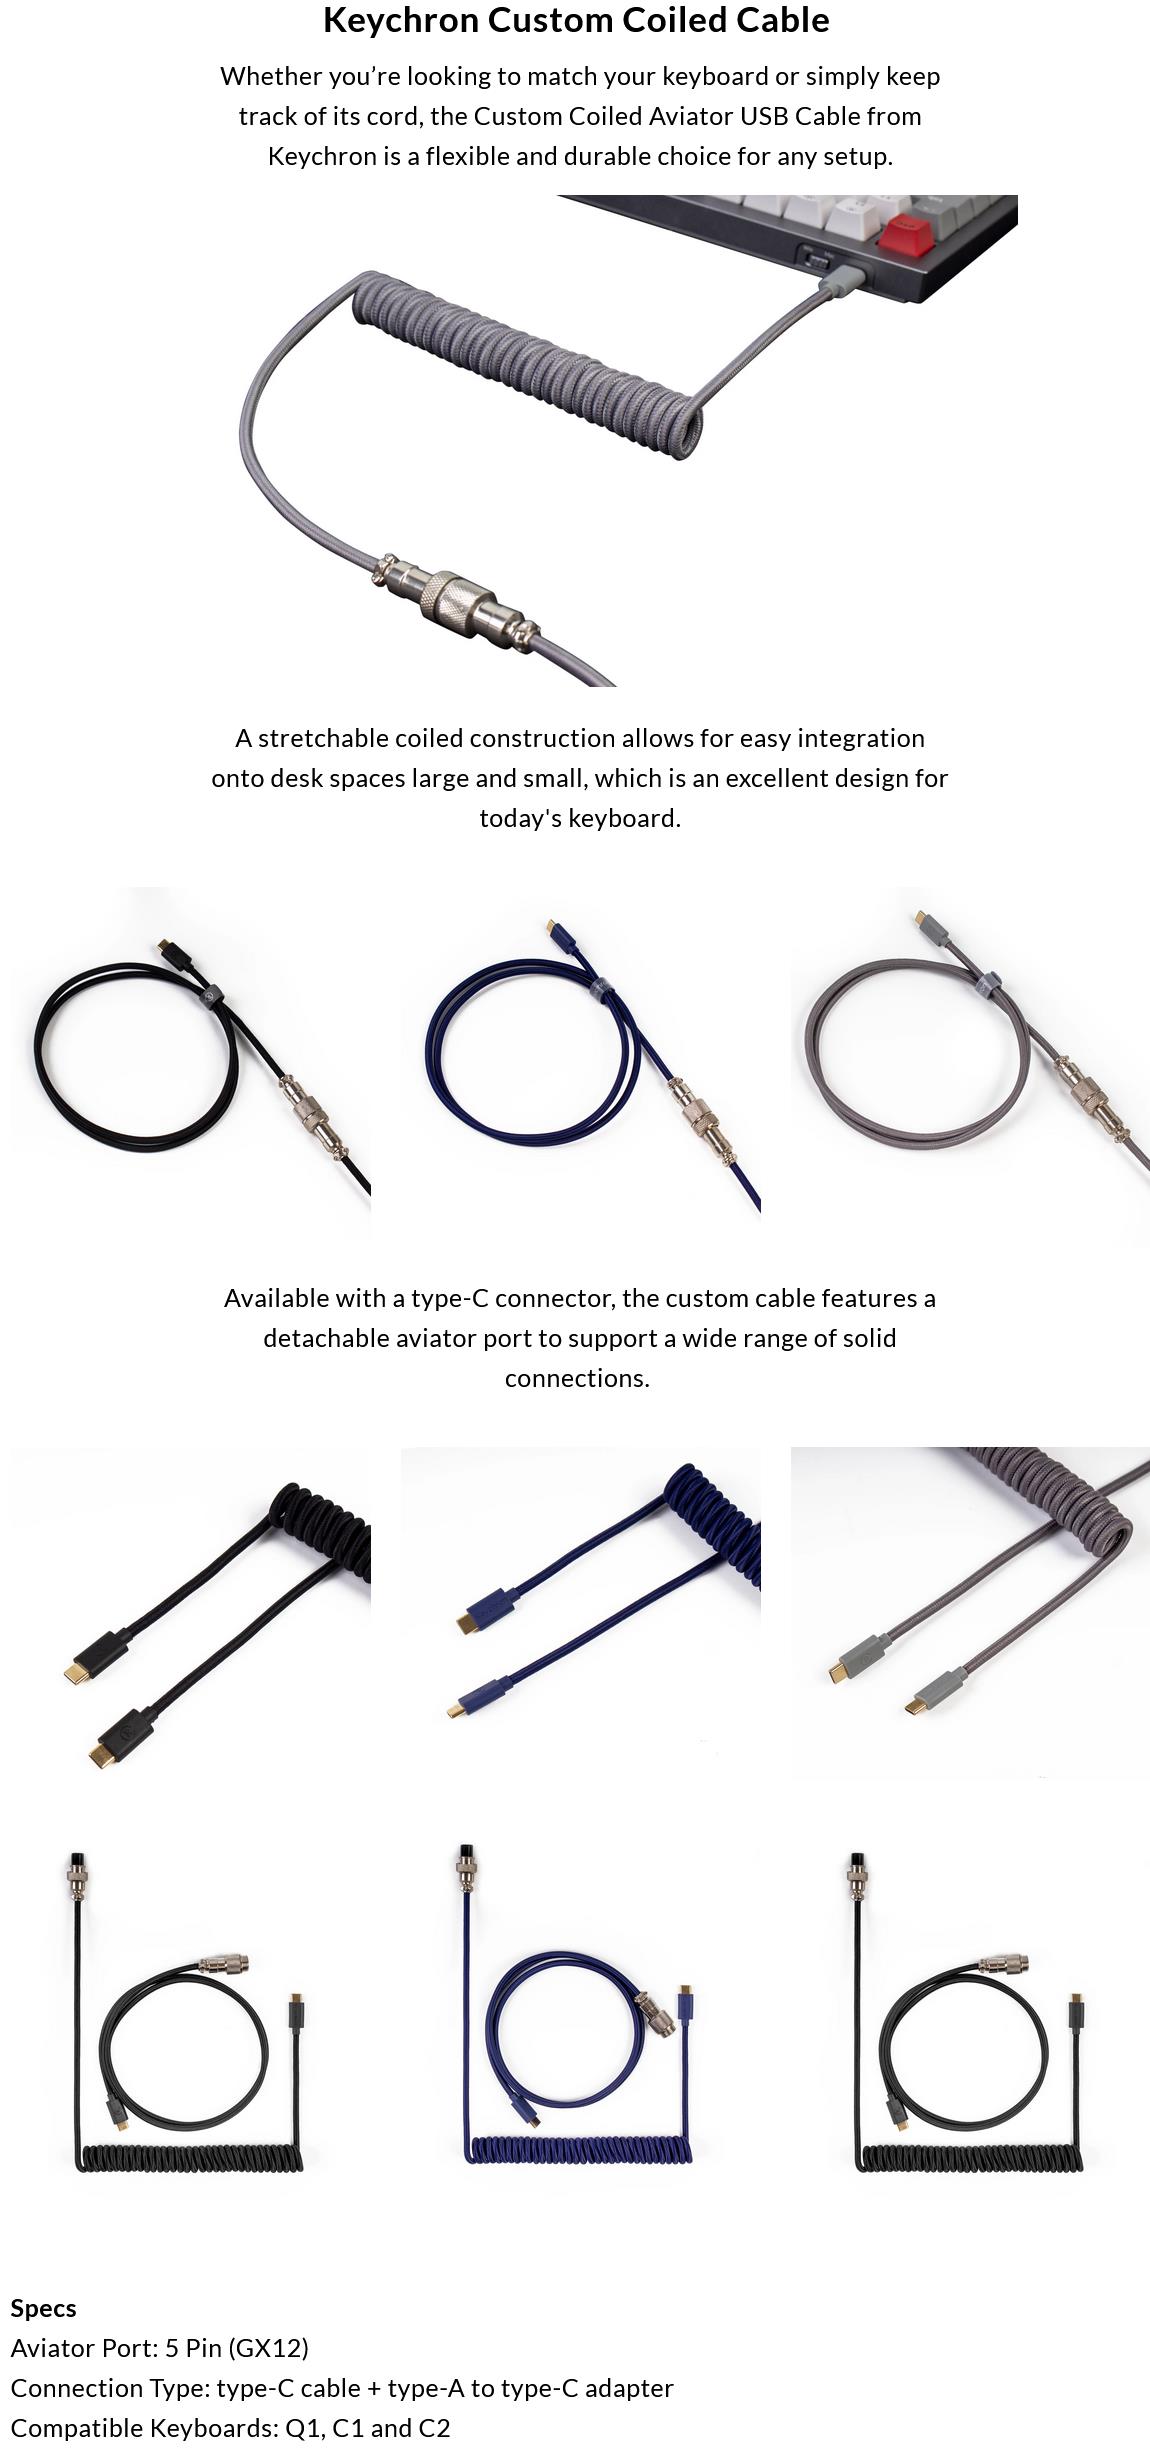 A large marketing image providing additional information about the product Keychron Custom Coiled Aviator Cable USB-C Cable with USB-A Adapter - Black - Additional alt info not provided